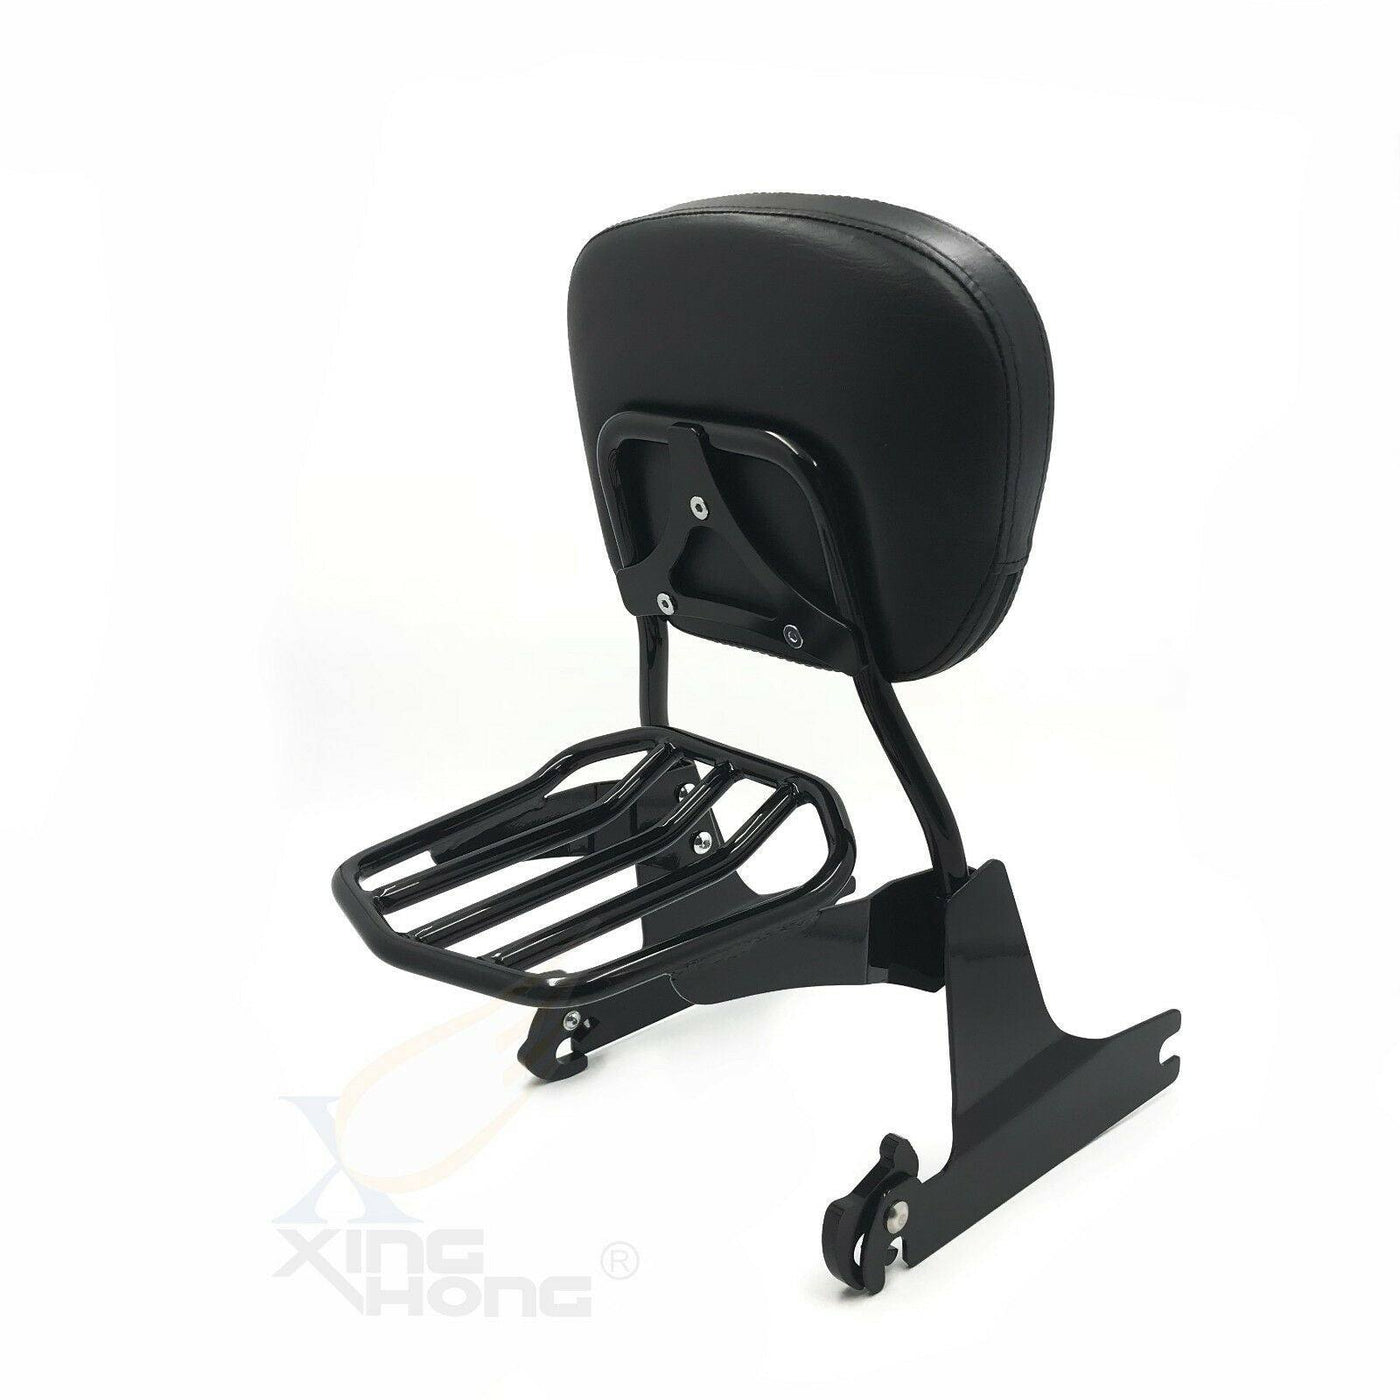 Sissy Bar Passenger Backrest Luggage Rack For Harley Softail Standard FXST 00-05 - Moto Life Products